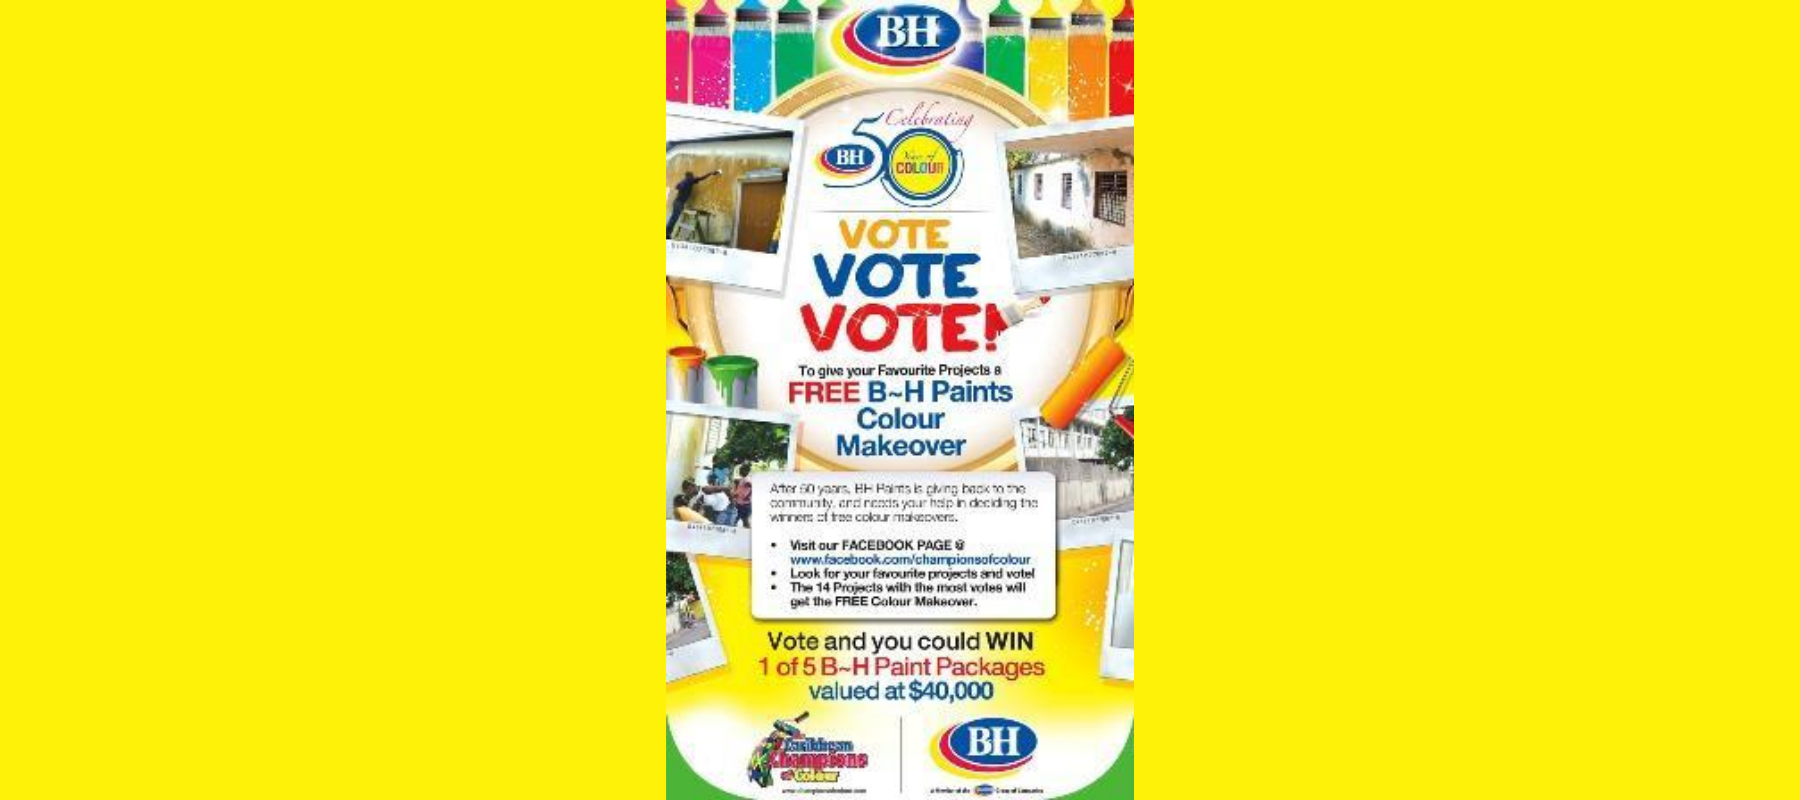 BH Paints Giving Free Colour Make-over to Public Projects